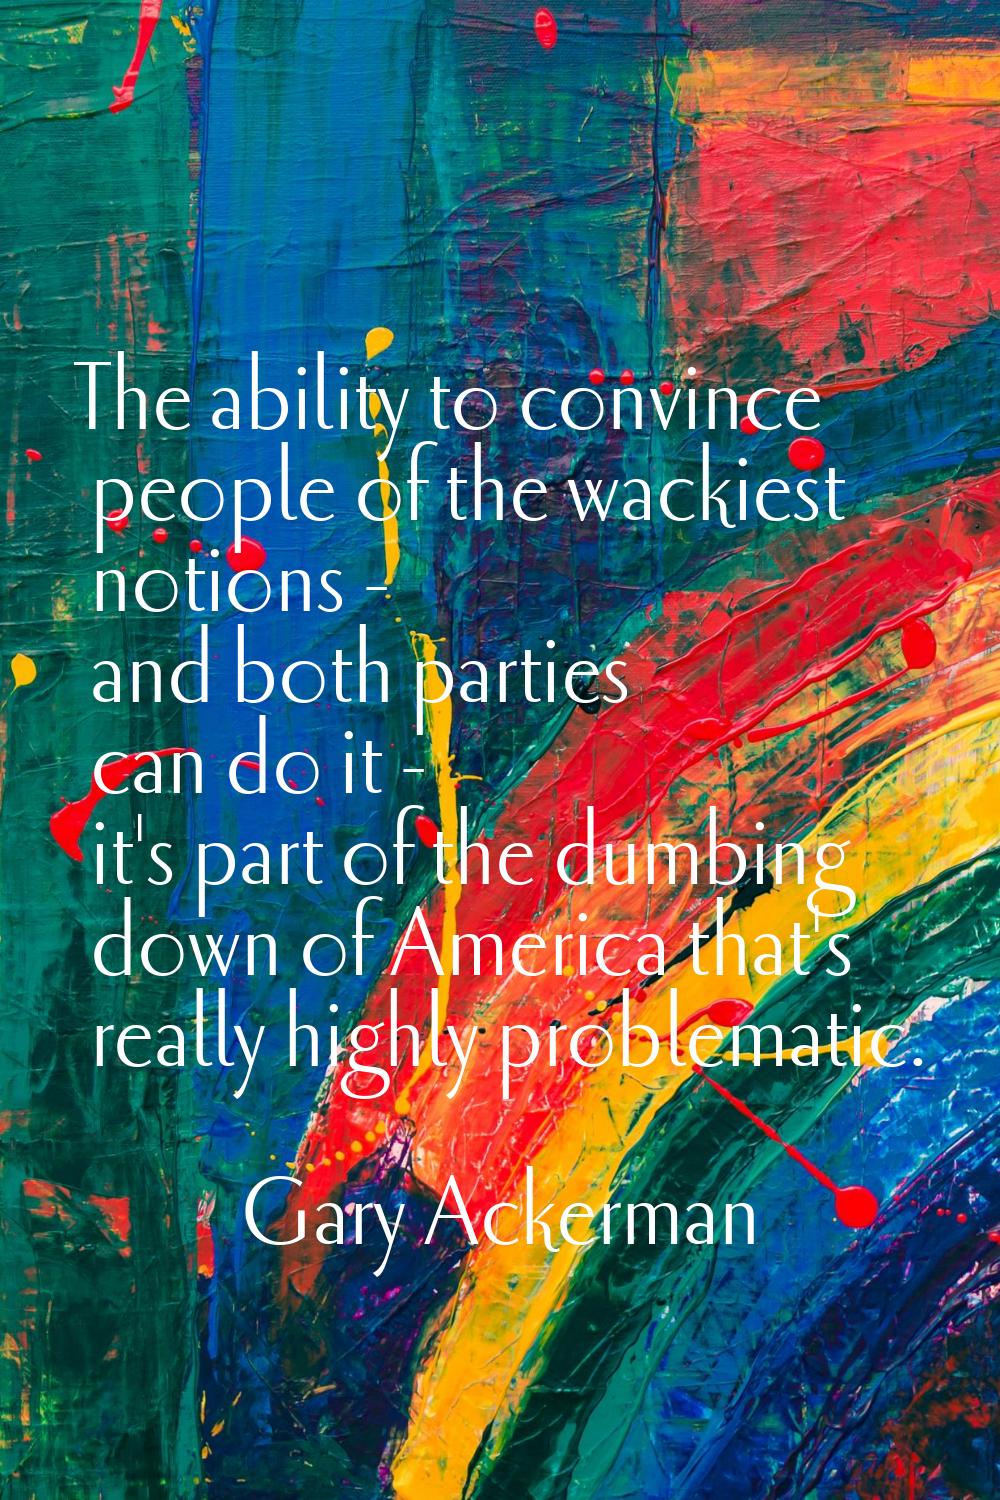 The ability to convince people of the wackiest notions - and both parties can do it - it's part of 